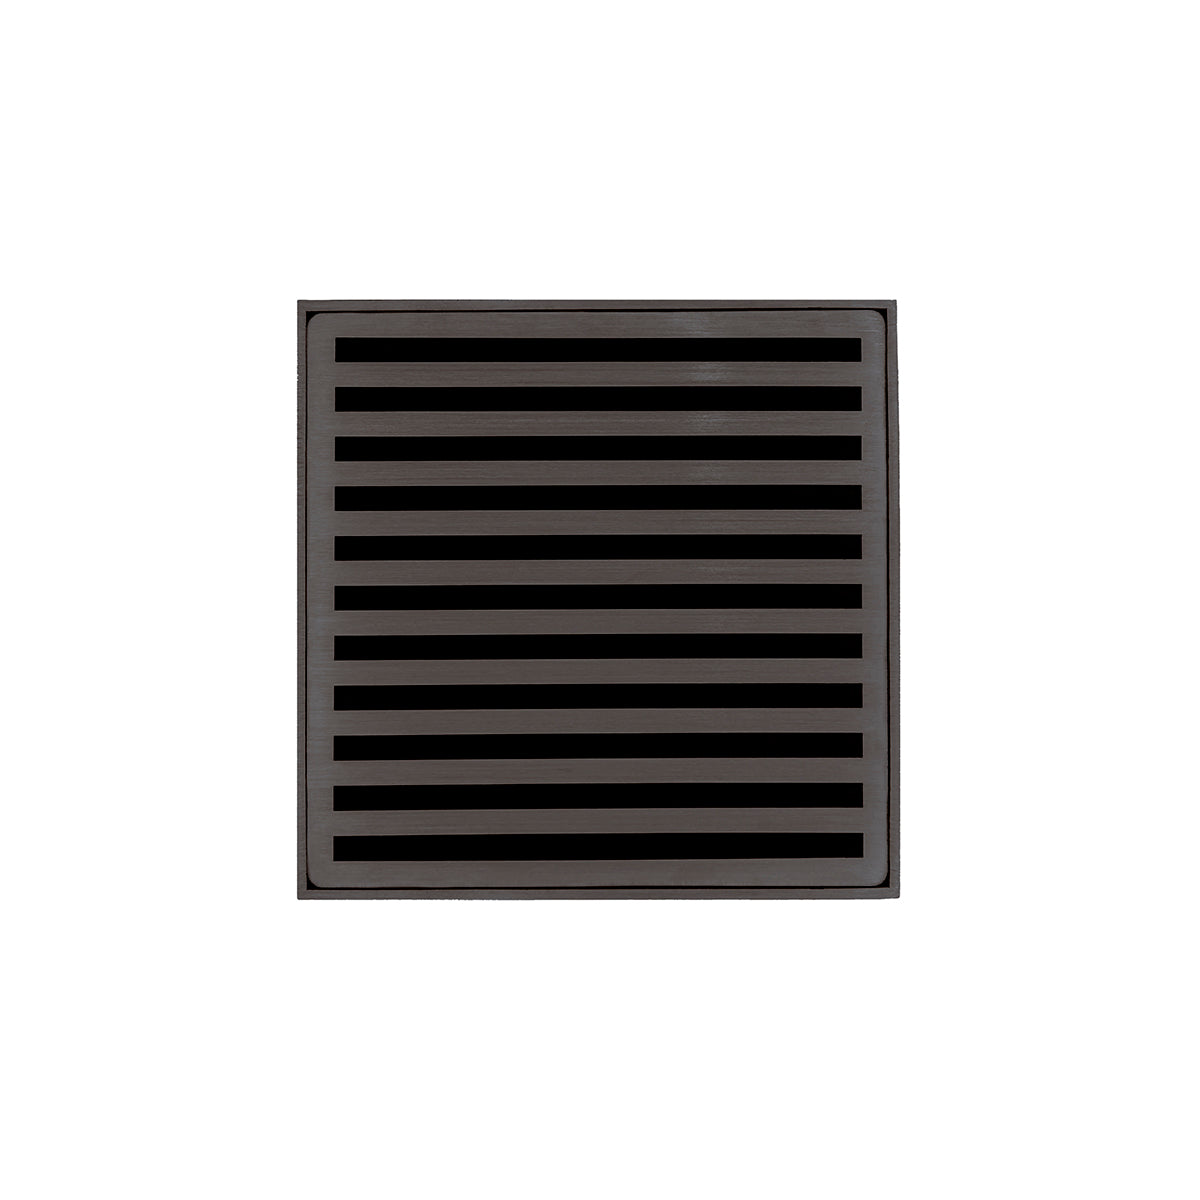 Infinity Drain 5" x 5" ND 5 High Flow Premium Center Drain Kit with Lines Pattern Decorative Plate with ABS Drain Body, 3" Outlet